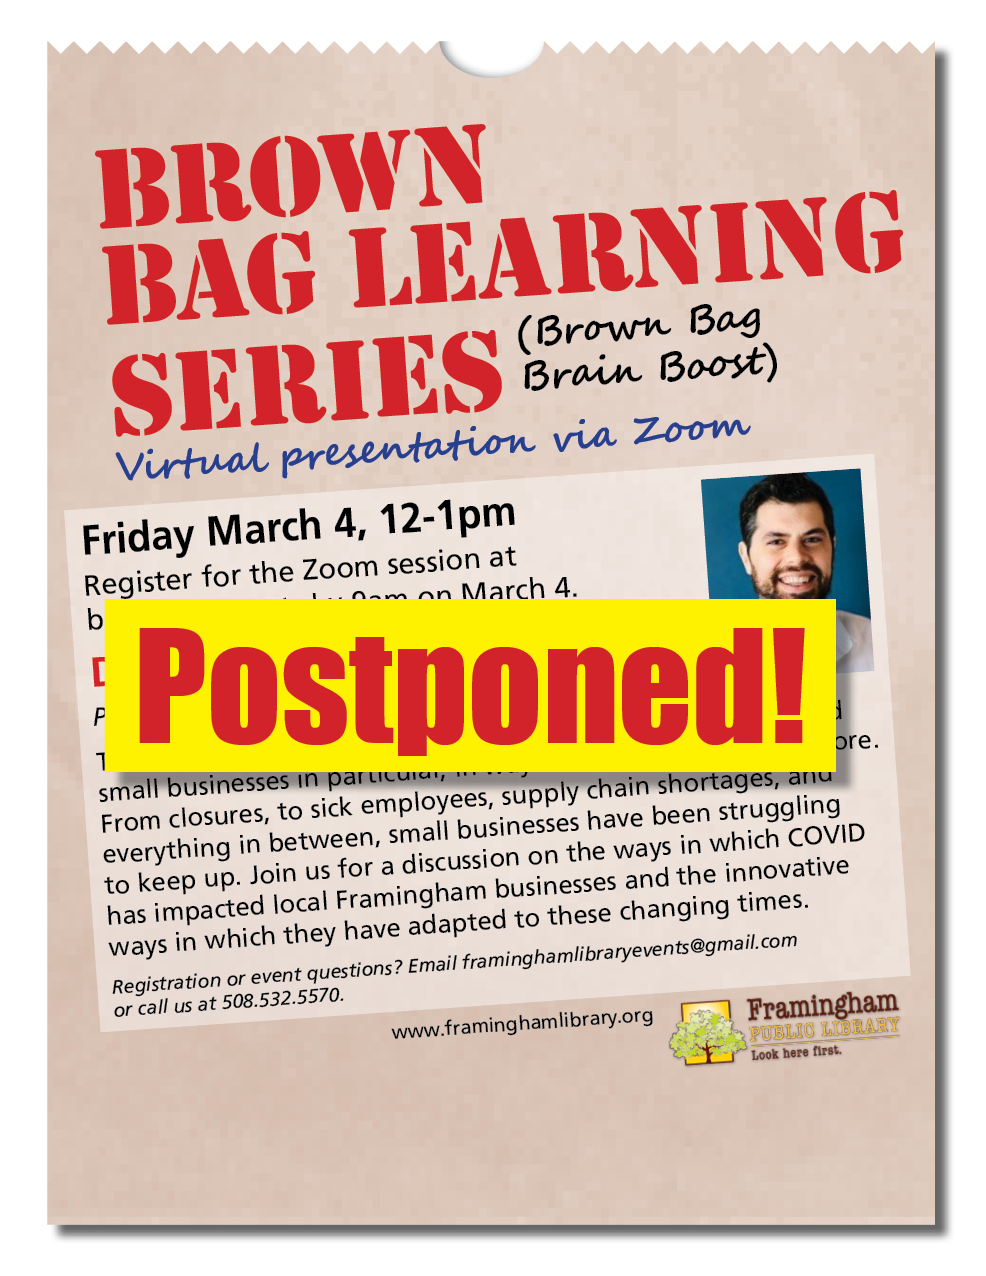 Brown Bag Learning Series: Downtown Framingham, Inc, with Anthony Lucivero [POSTPONED] thumbnail Photo